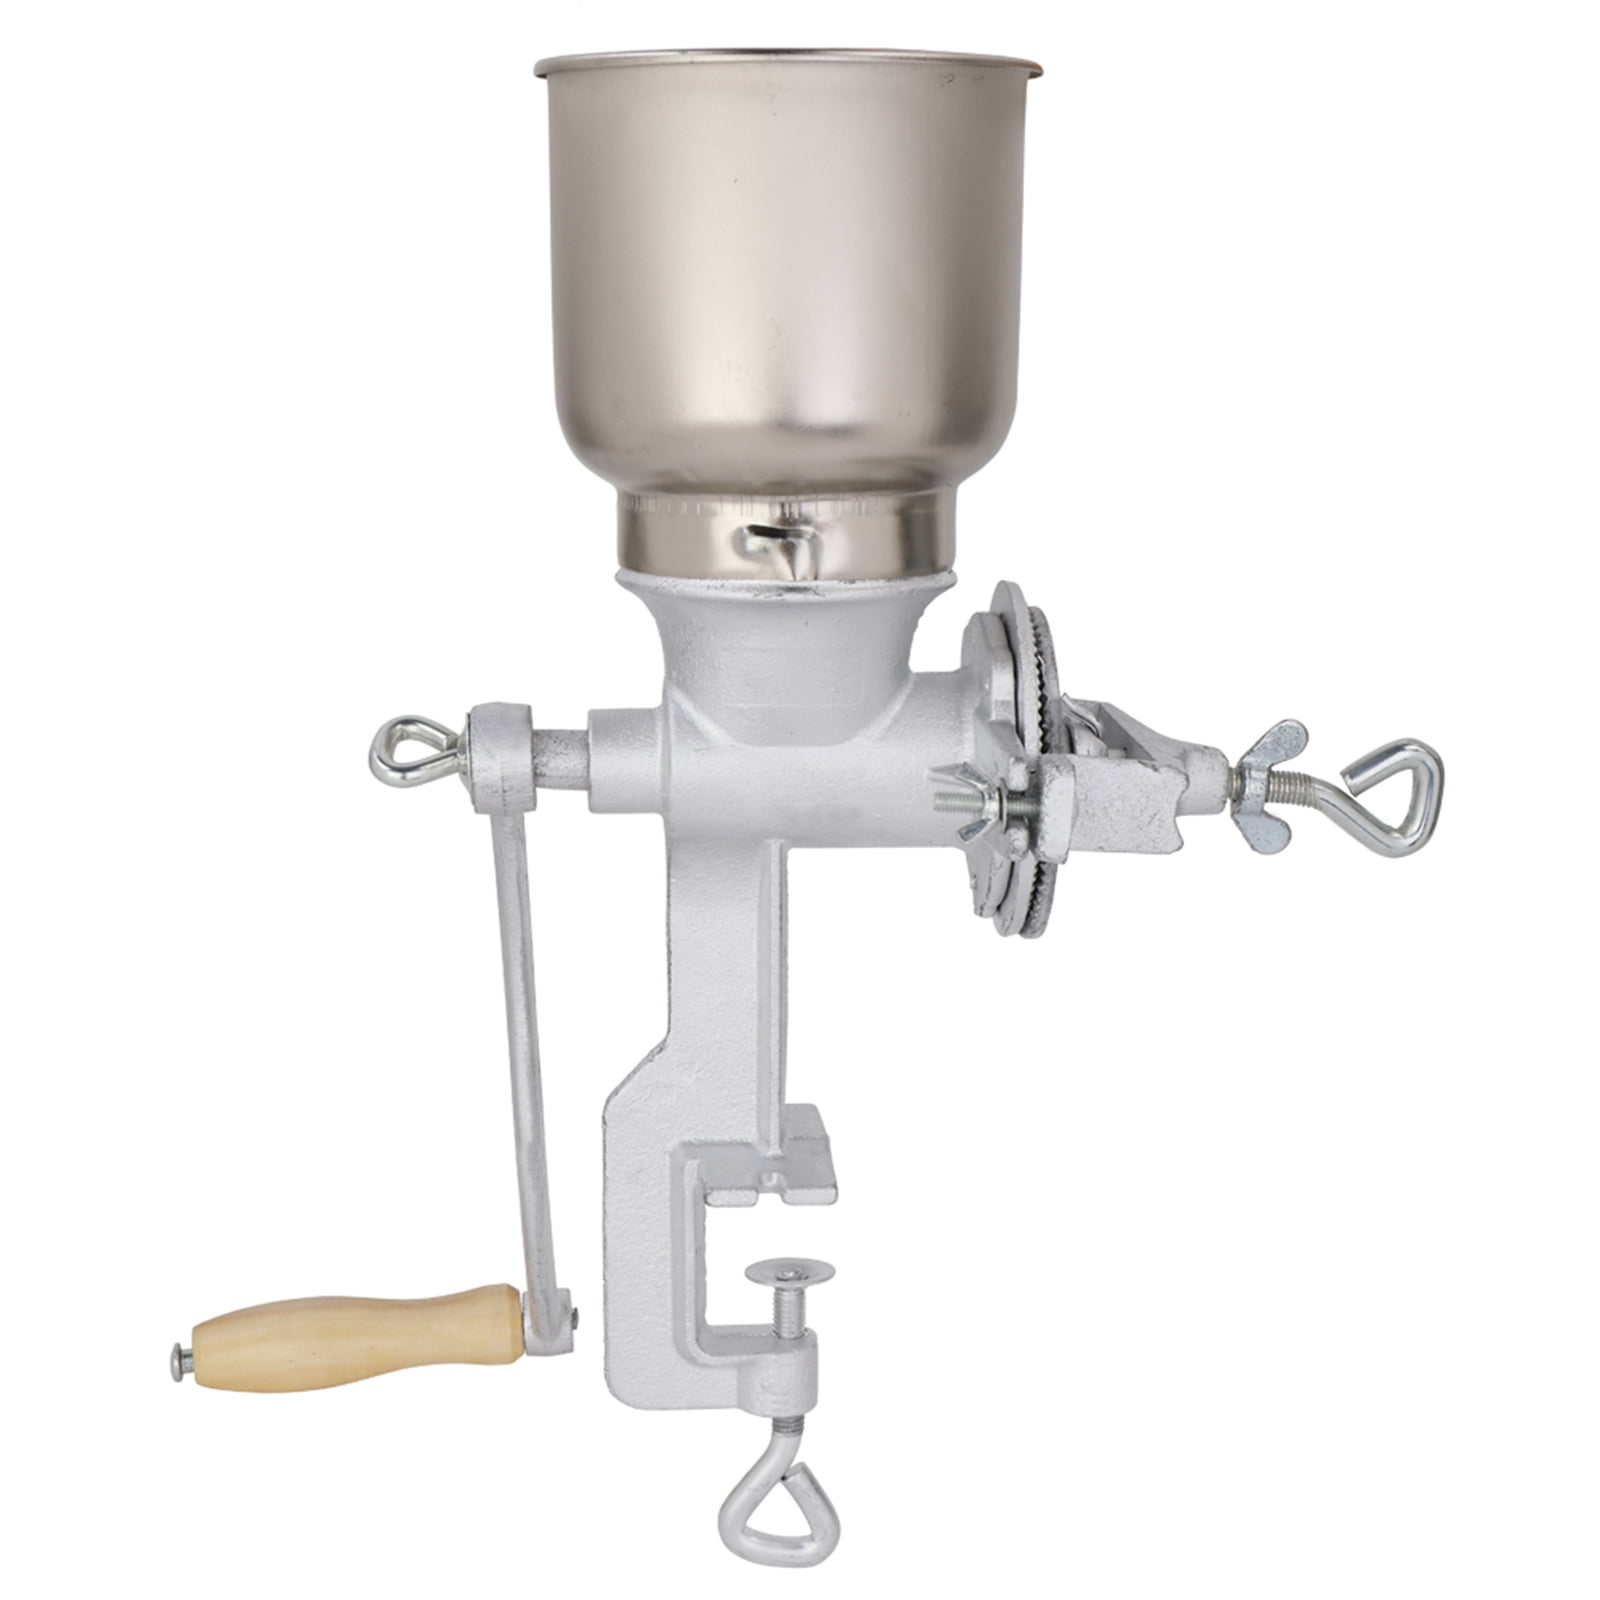 Details about   Adjustable Manual Grain Grinder Cast Iron Hand Crank Oats Corn Wheat Coffee Nuts 